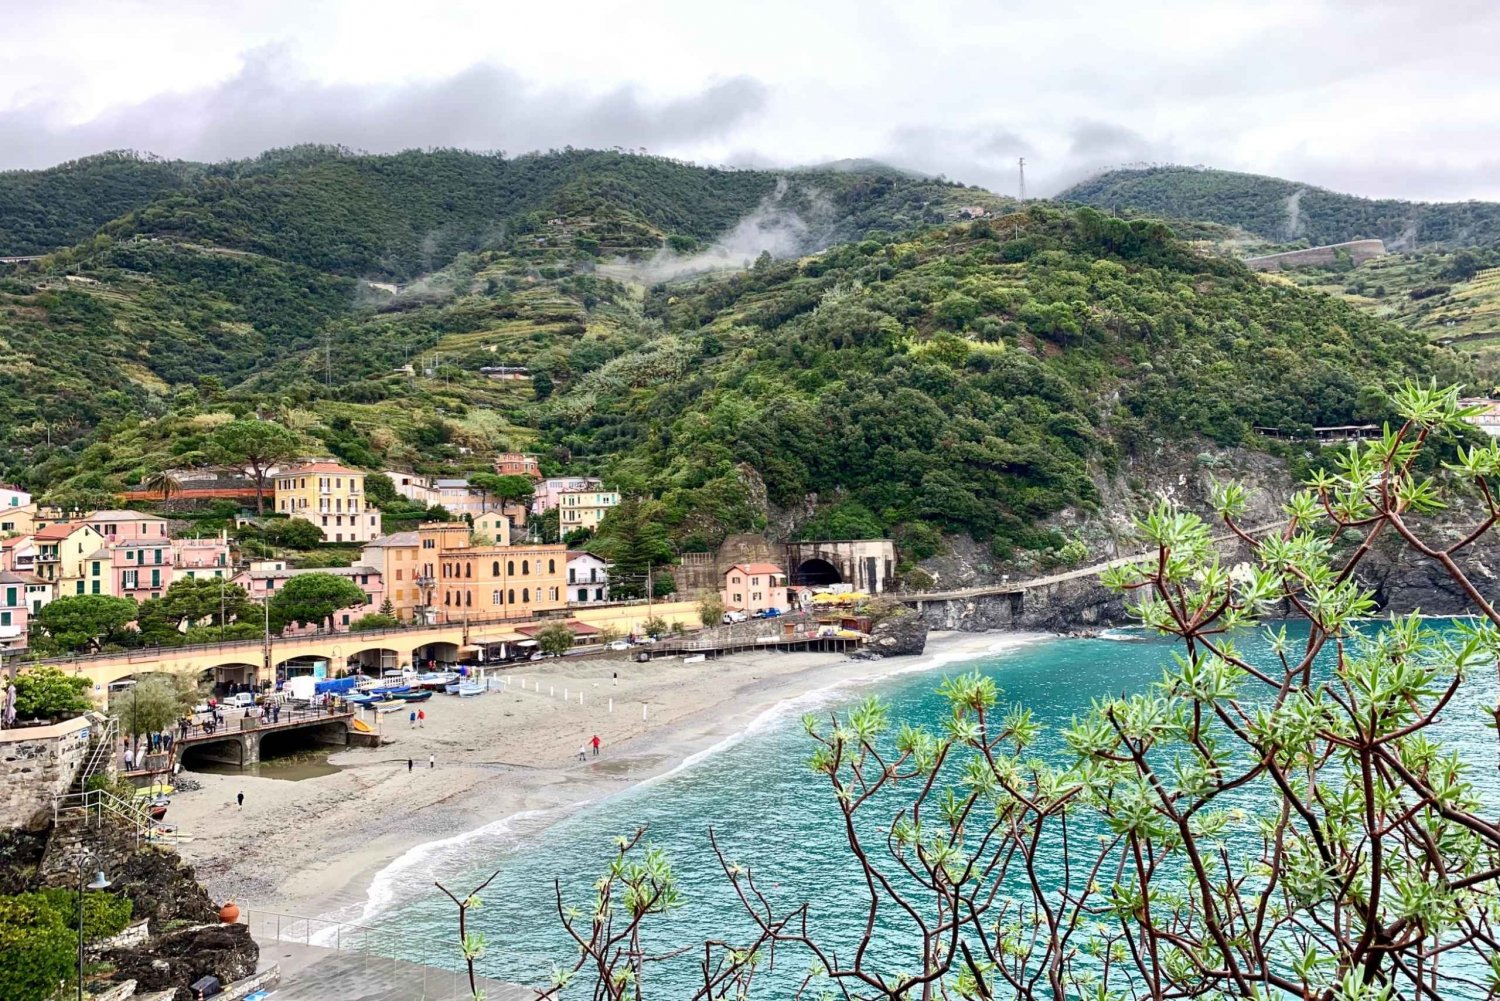 From Florence: Private Roundtrip Transfer to Cinque Terre